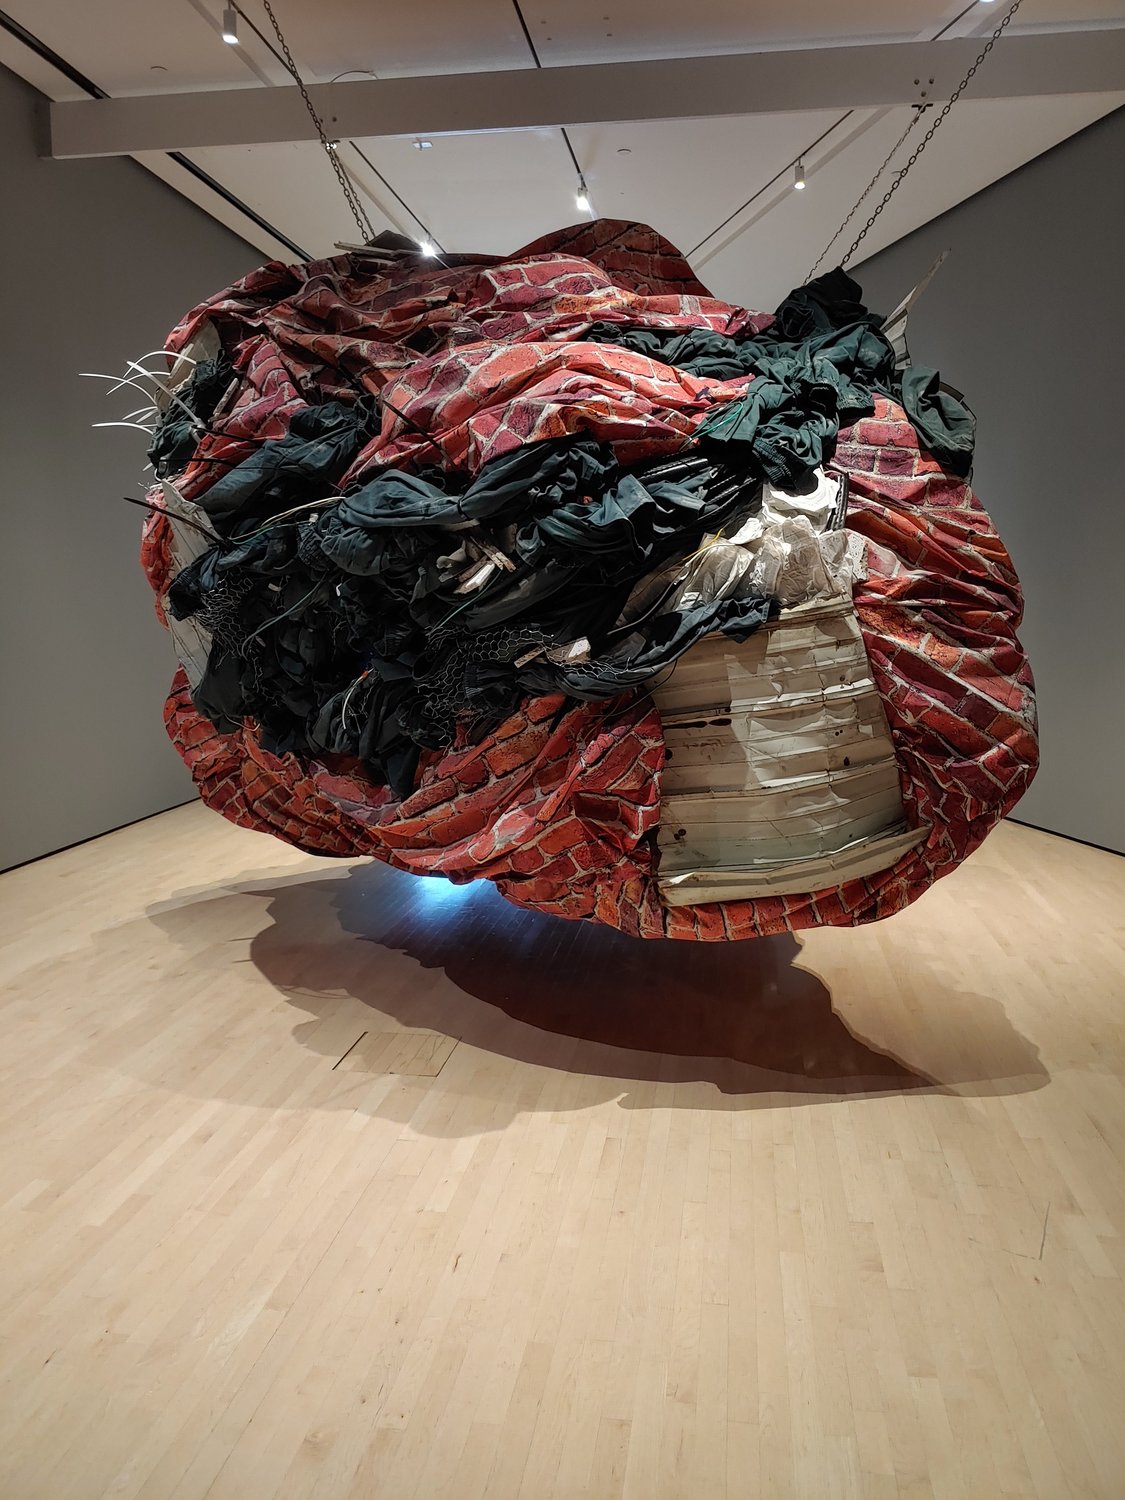 Keith LaMar, the subject and co-creator of “DIEGEST,” believes the carceral system is designed to break you down slowly and consume you like a digestive system. Artist Mia Pearlman molded prison materials such as brick, barbed wire and zip-tie handcuffs to resemble an enormous, organic mass representing this idea.